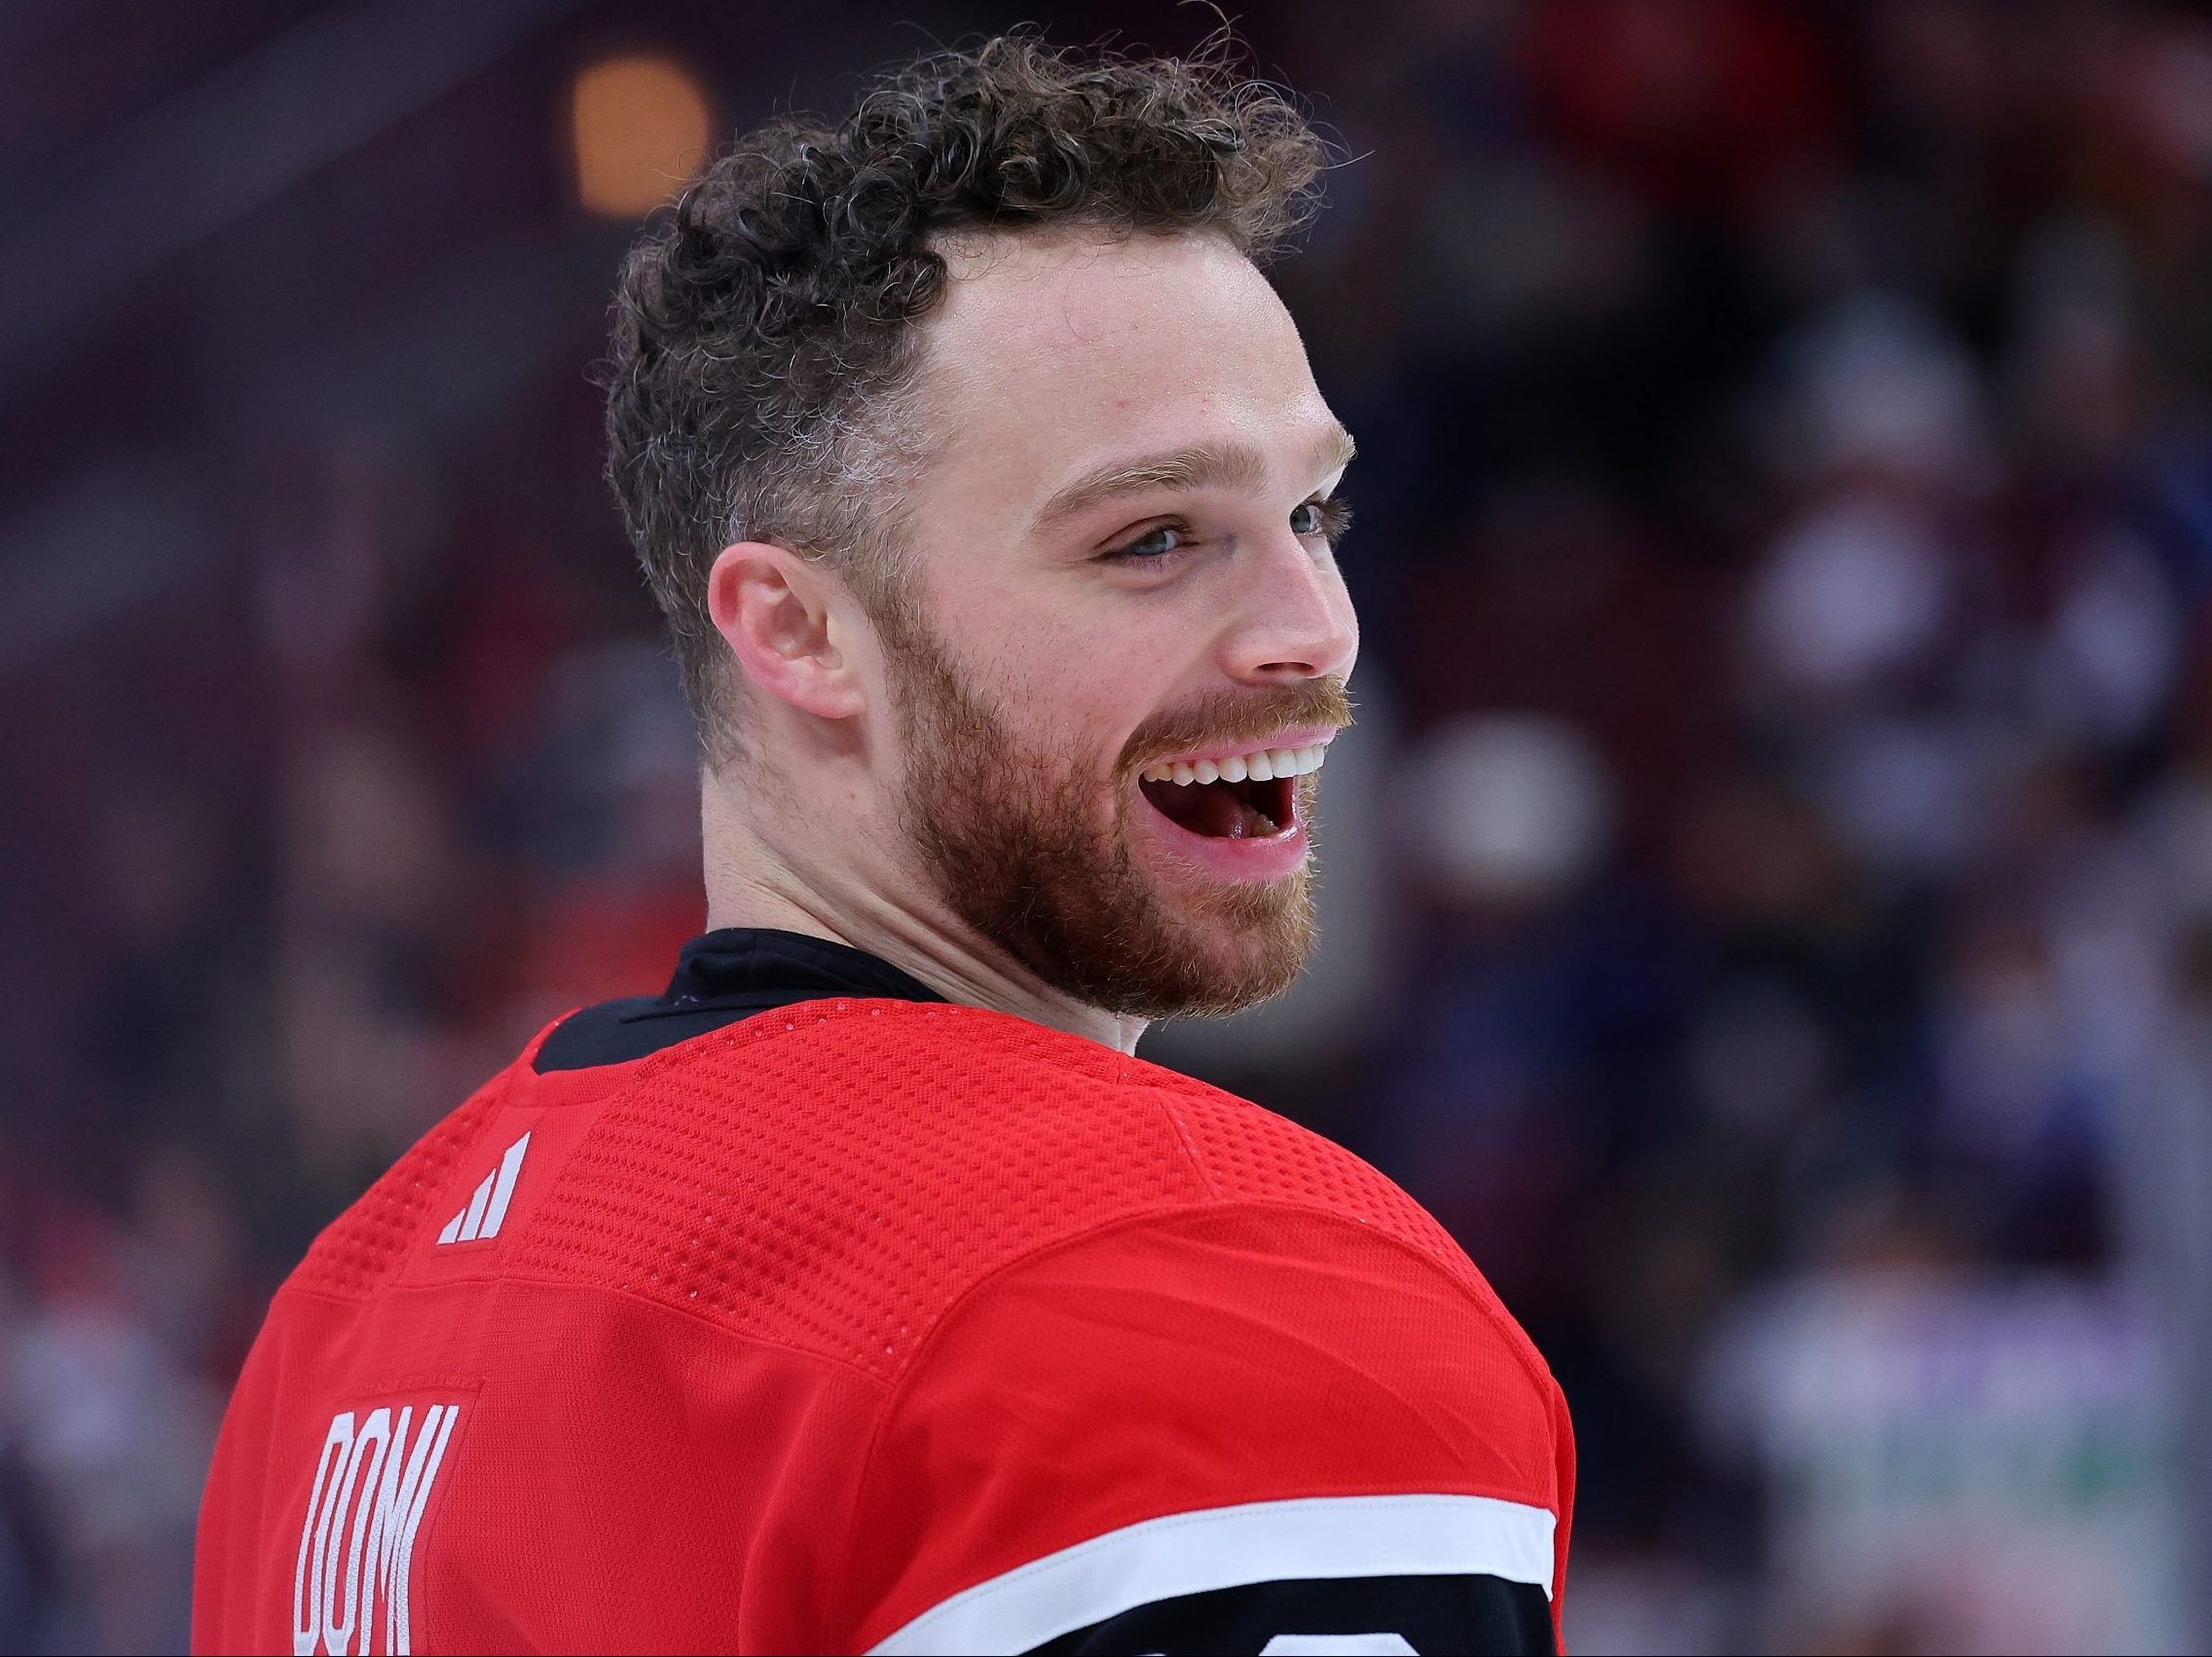 Is Max Domi Related To Tie Domi? Is Max Domi Tie Domi Son? - News